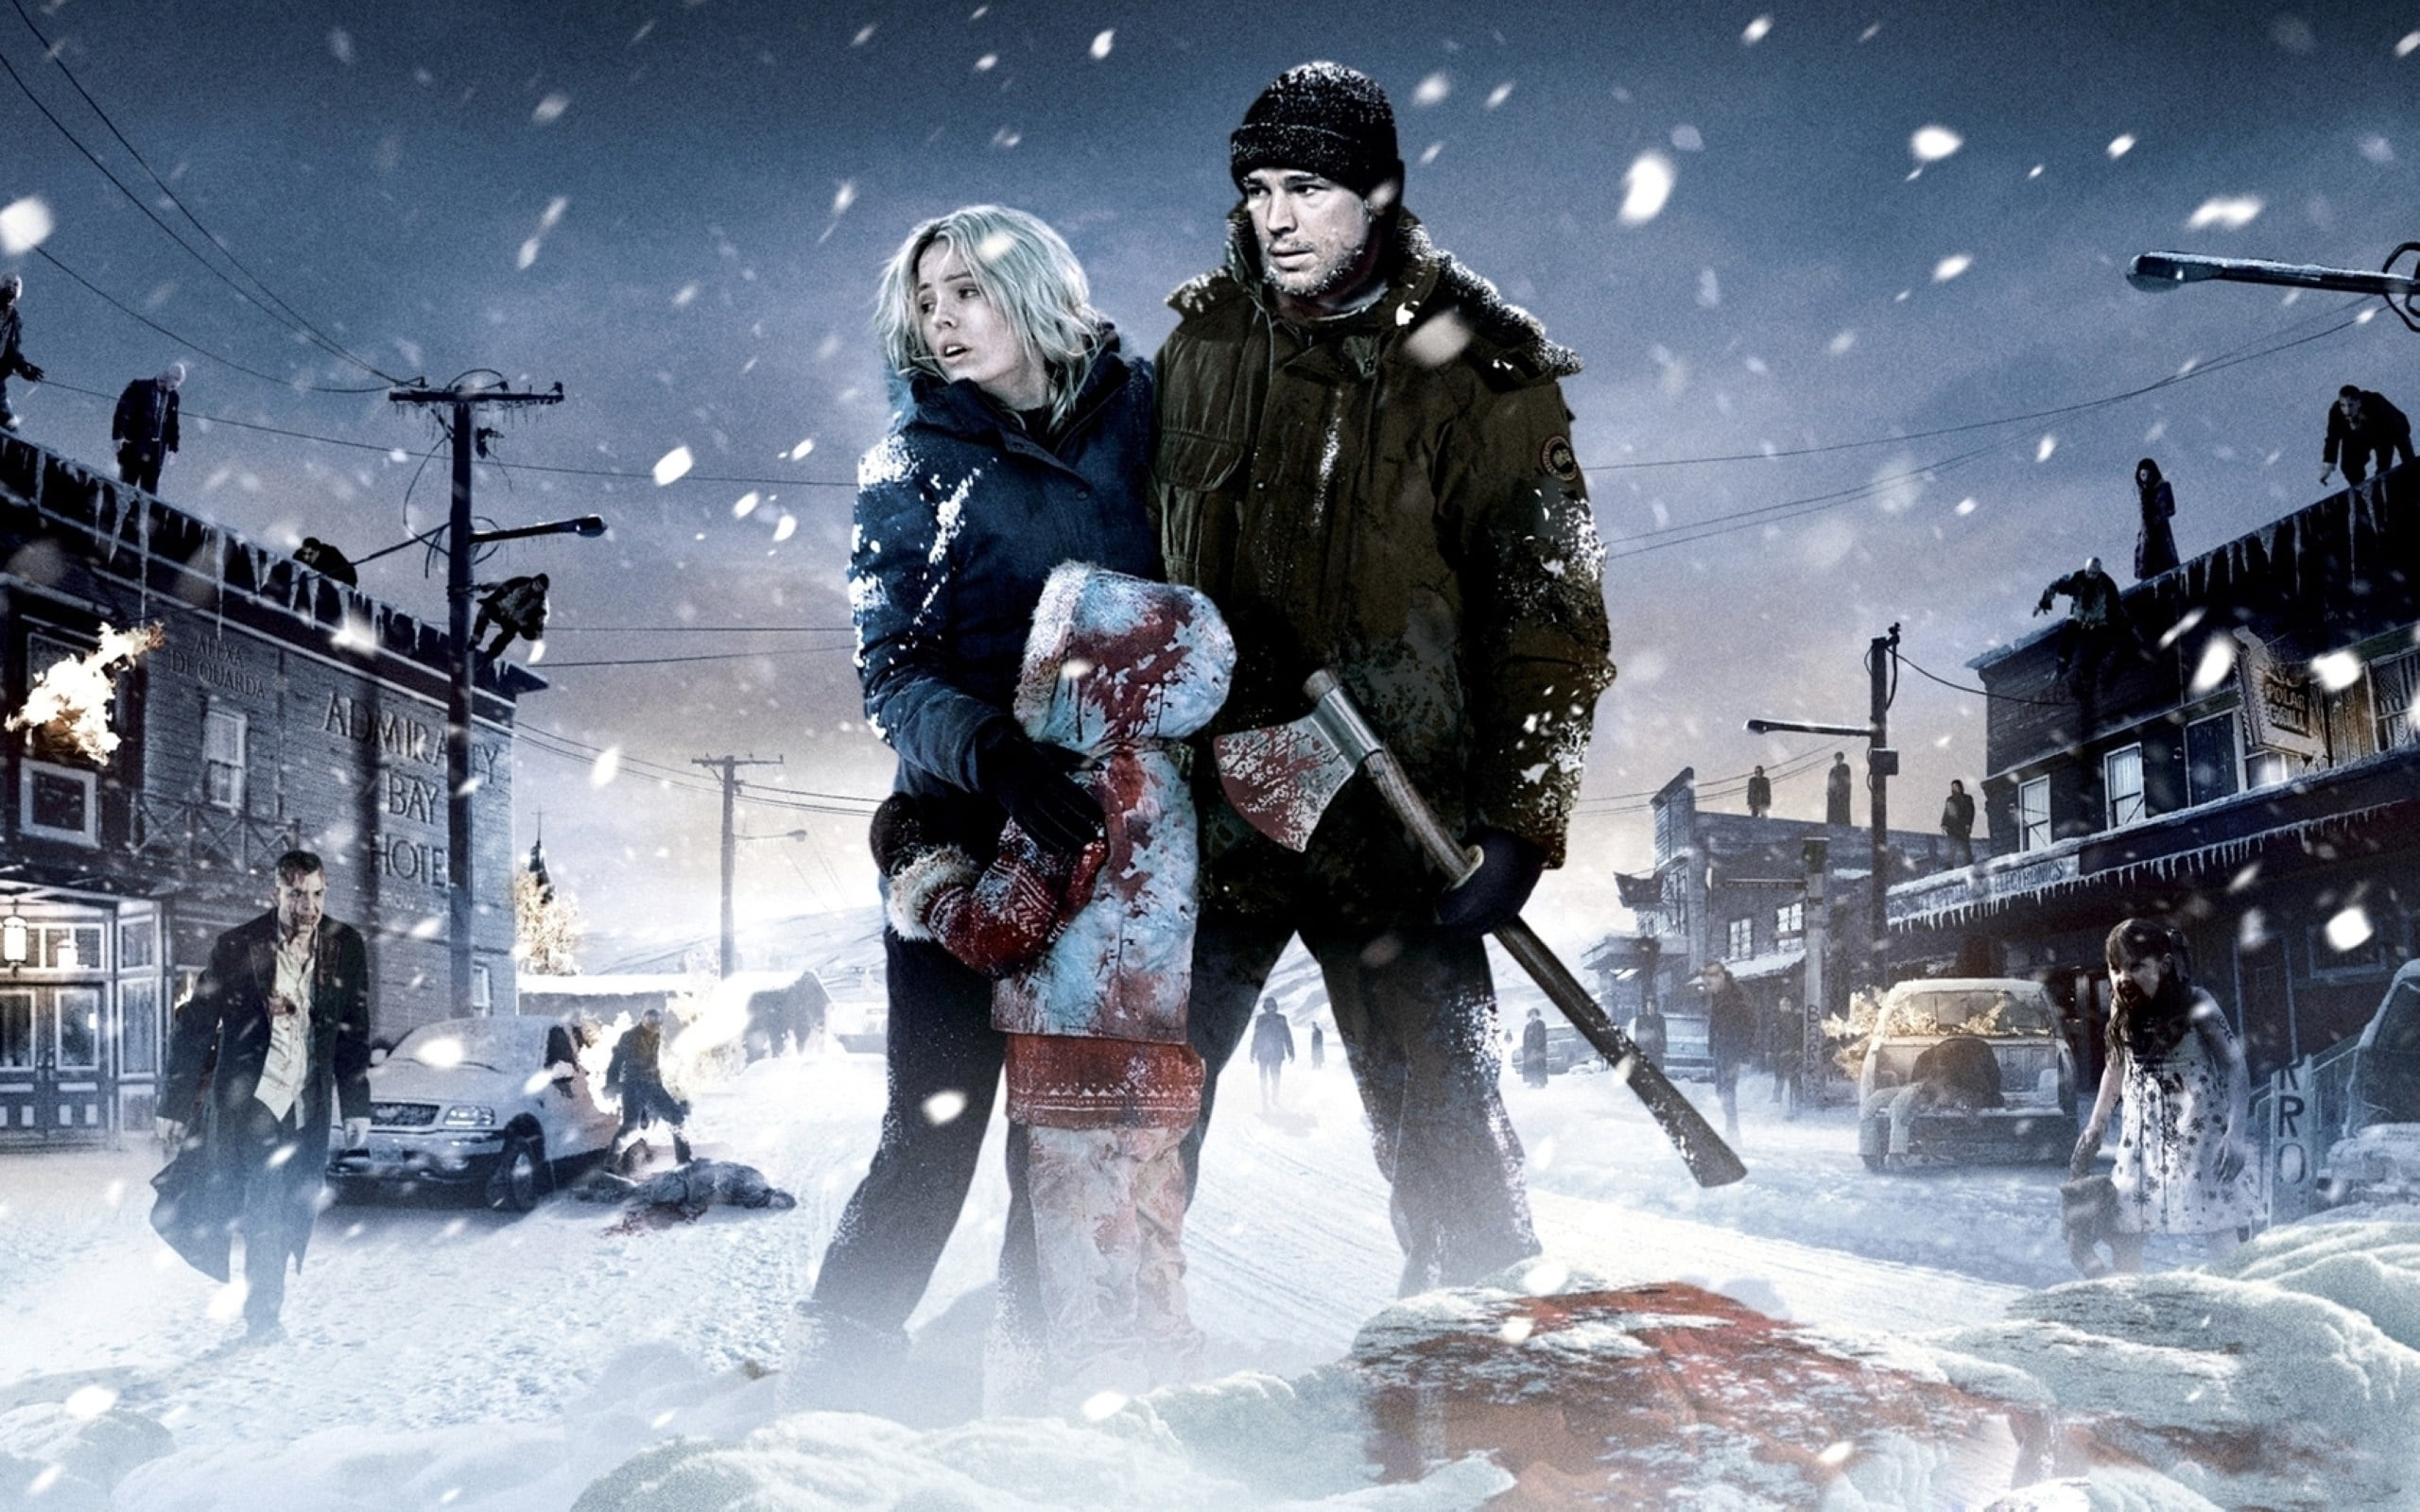 30 Days Of Night In We Are Dead, man and woman movie cover, Movies